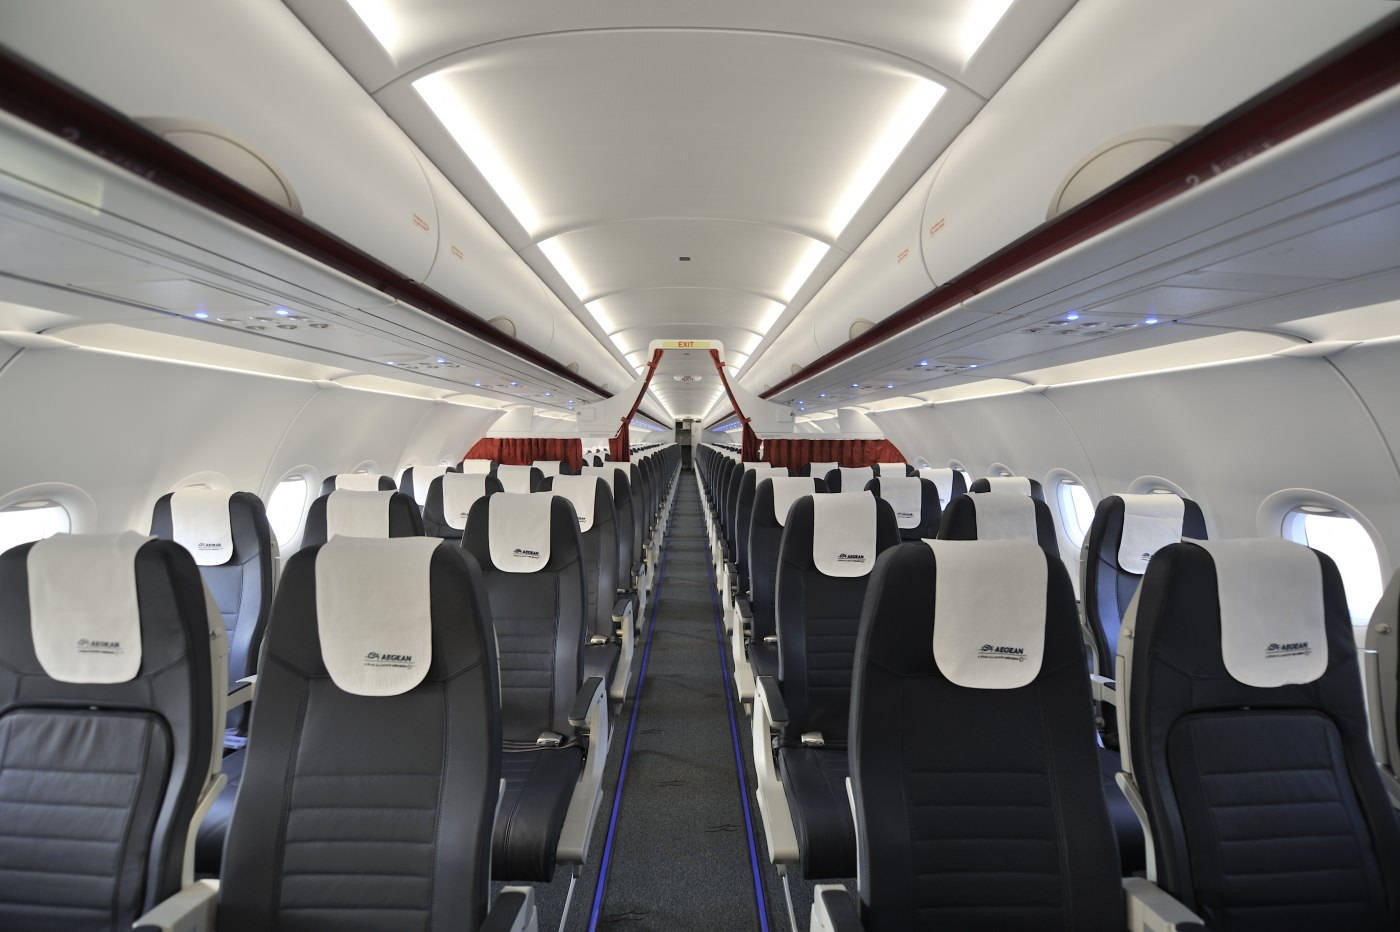 Aegean Airlines Flag Carrier Economy Class Seats Wallpaper